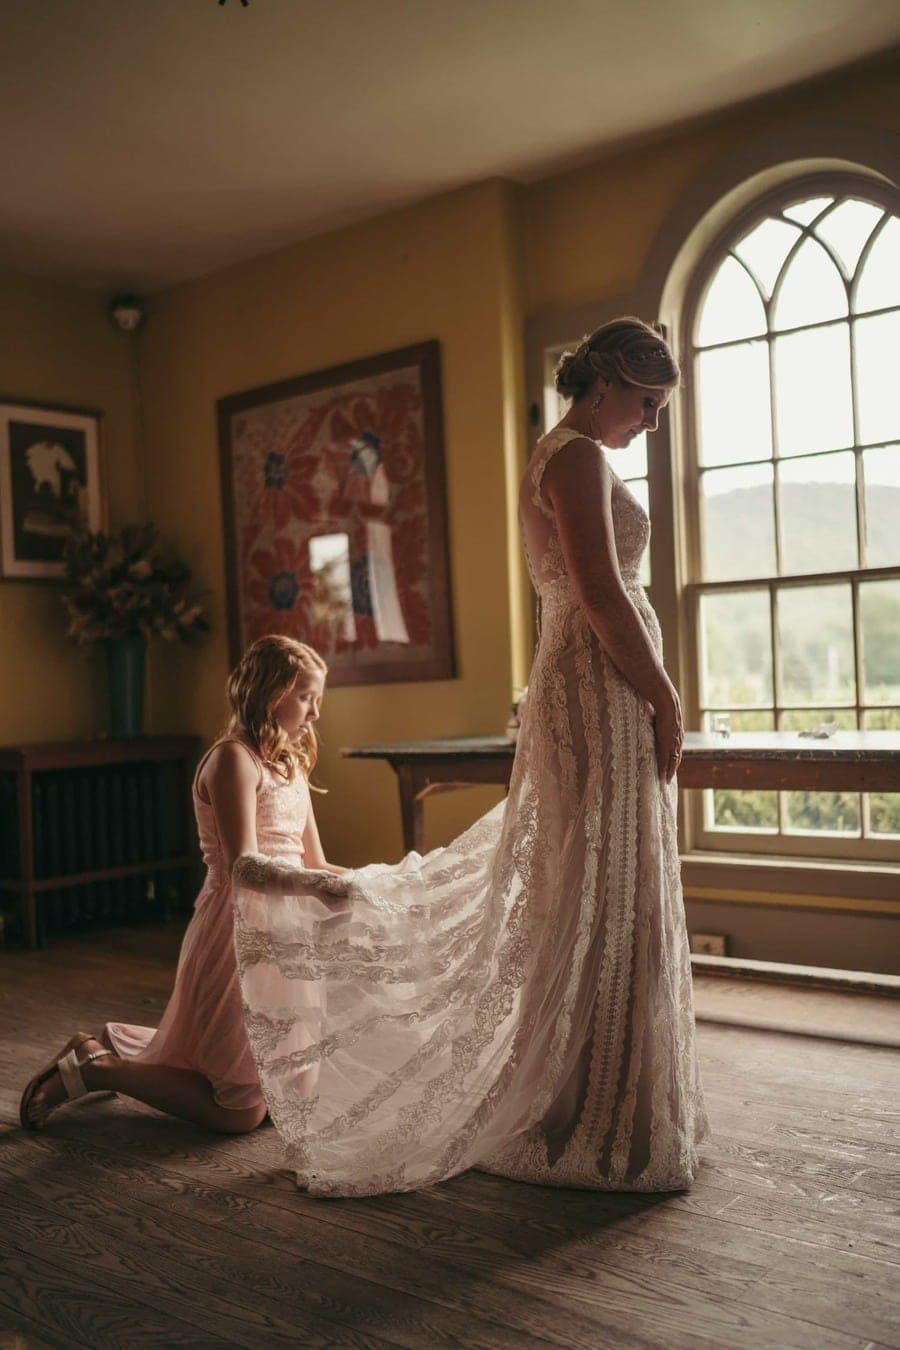 Flower girl fixes bride's dress as light from window comes into room and shines through lace dress before wedding ceremony.